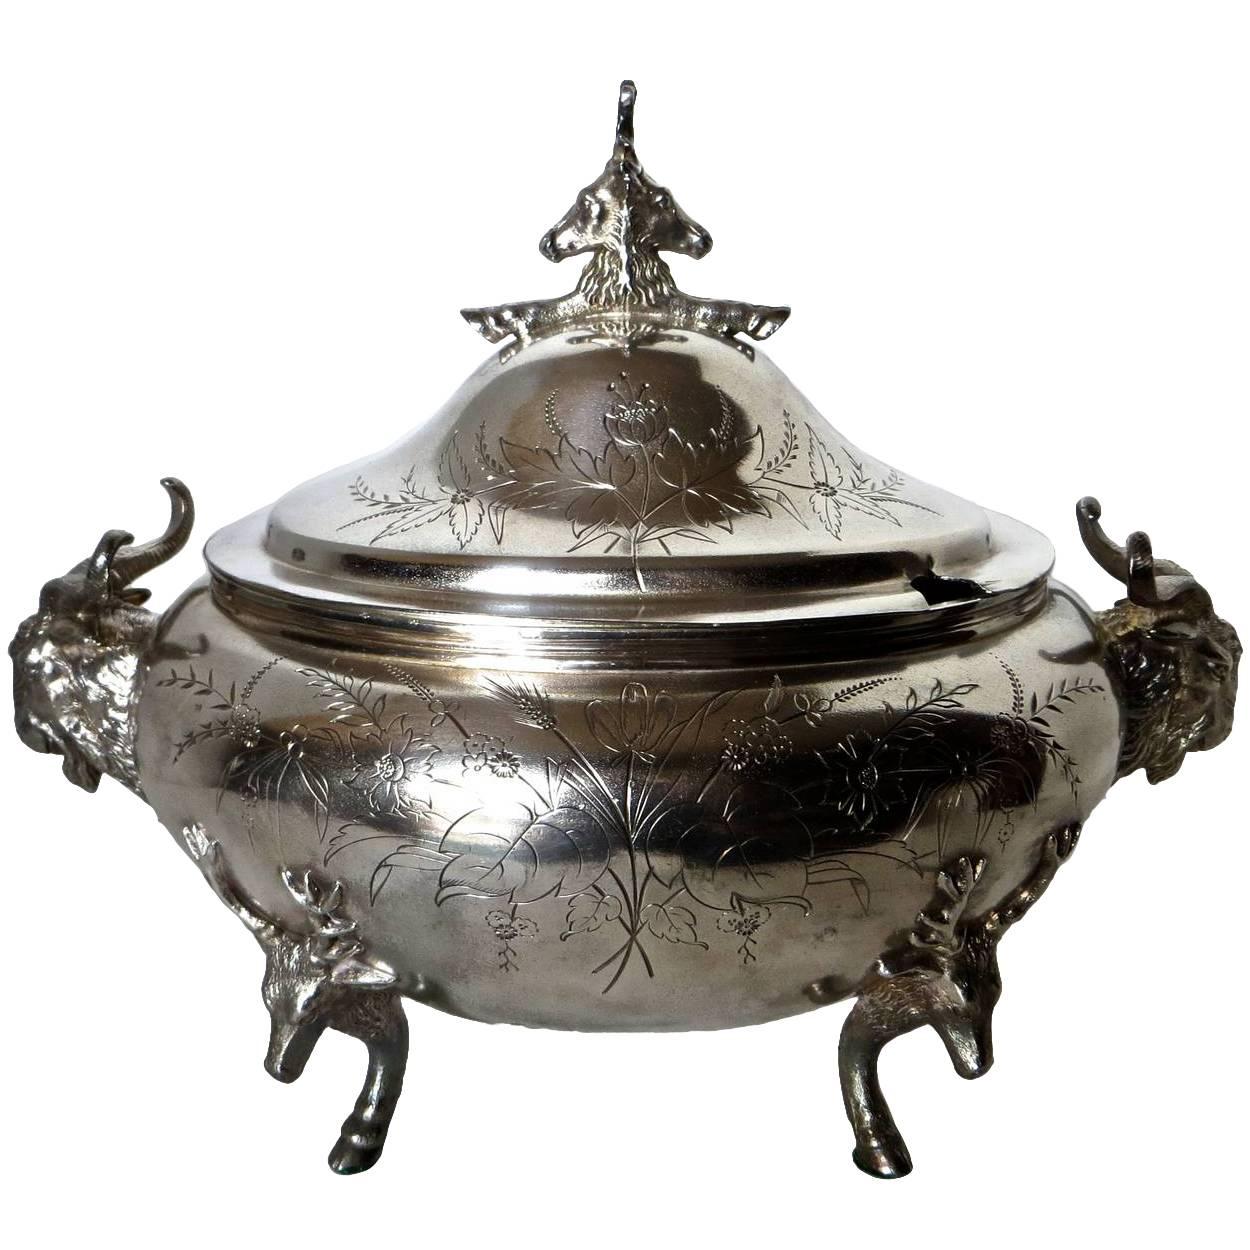 Silver Plated Covered Tureen with Deer and Ram Motif, circa 1885, Meriden